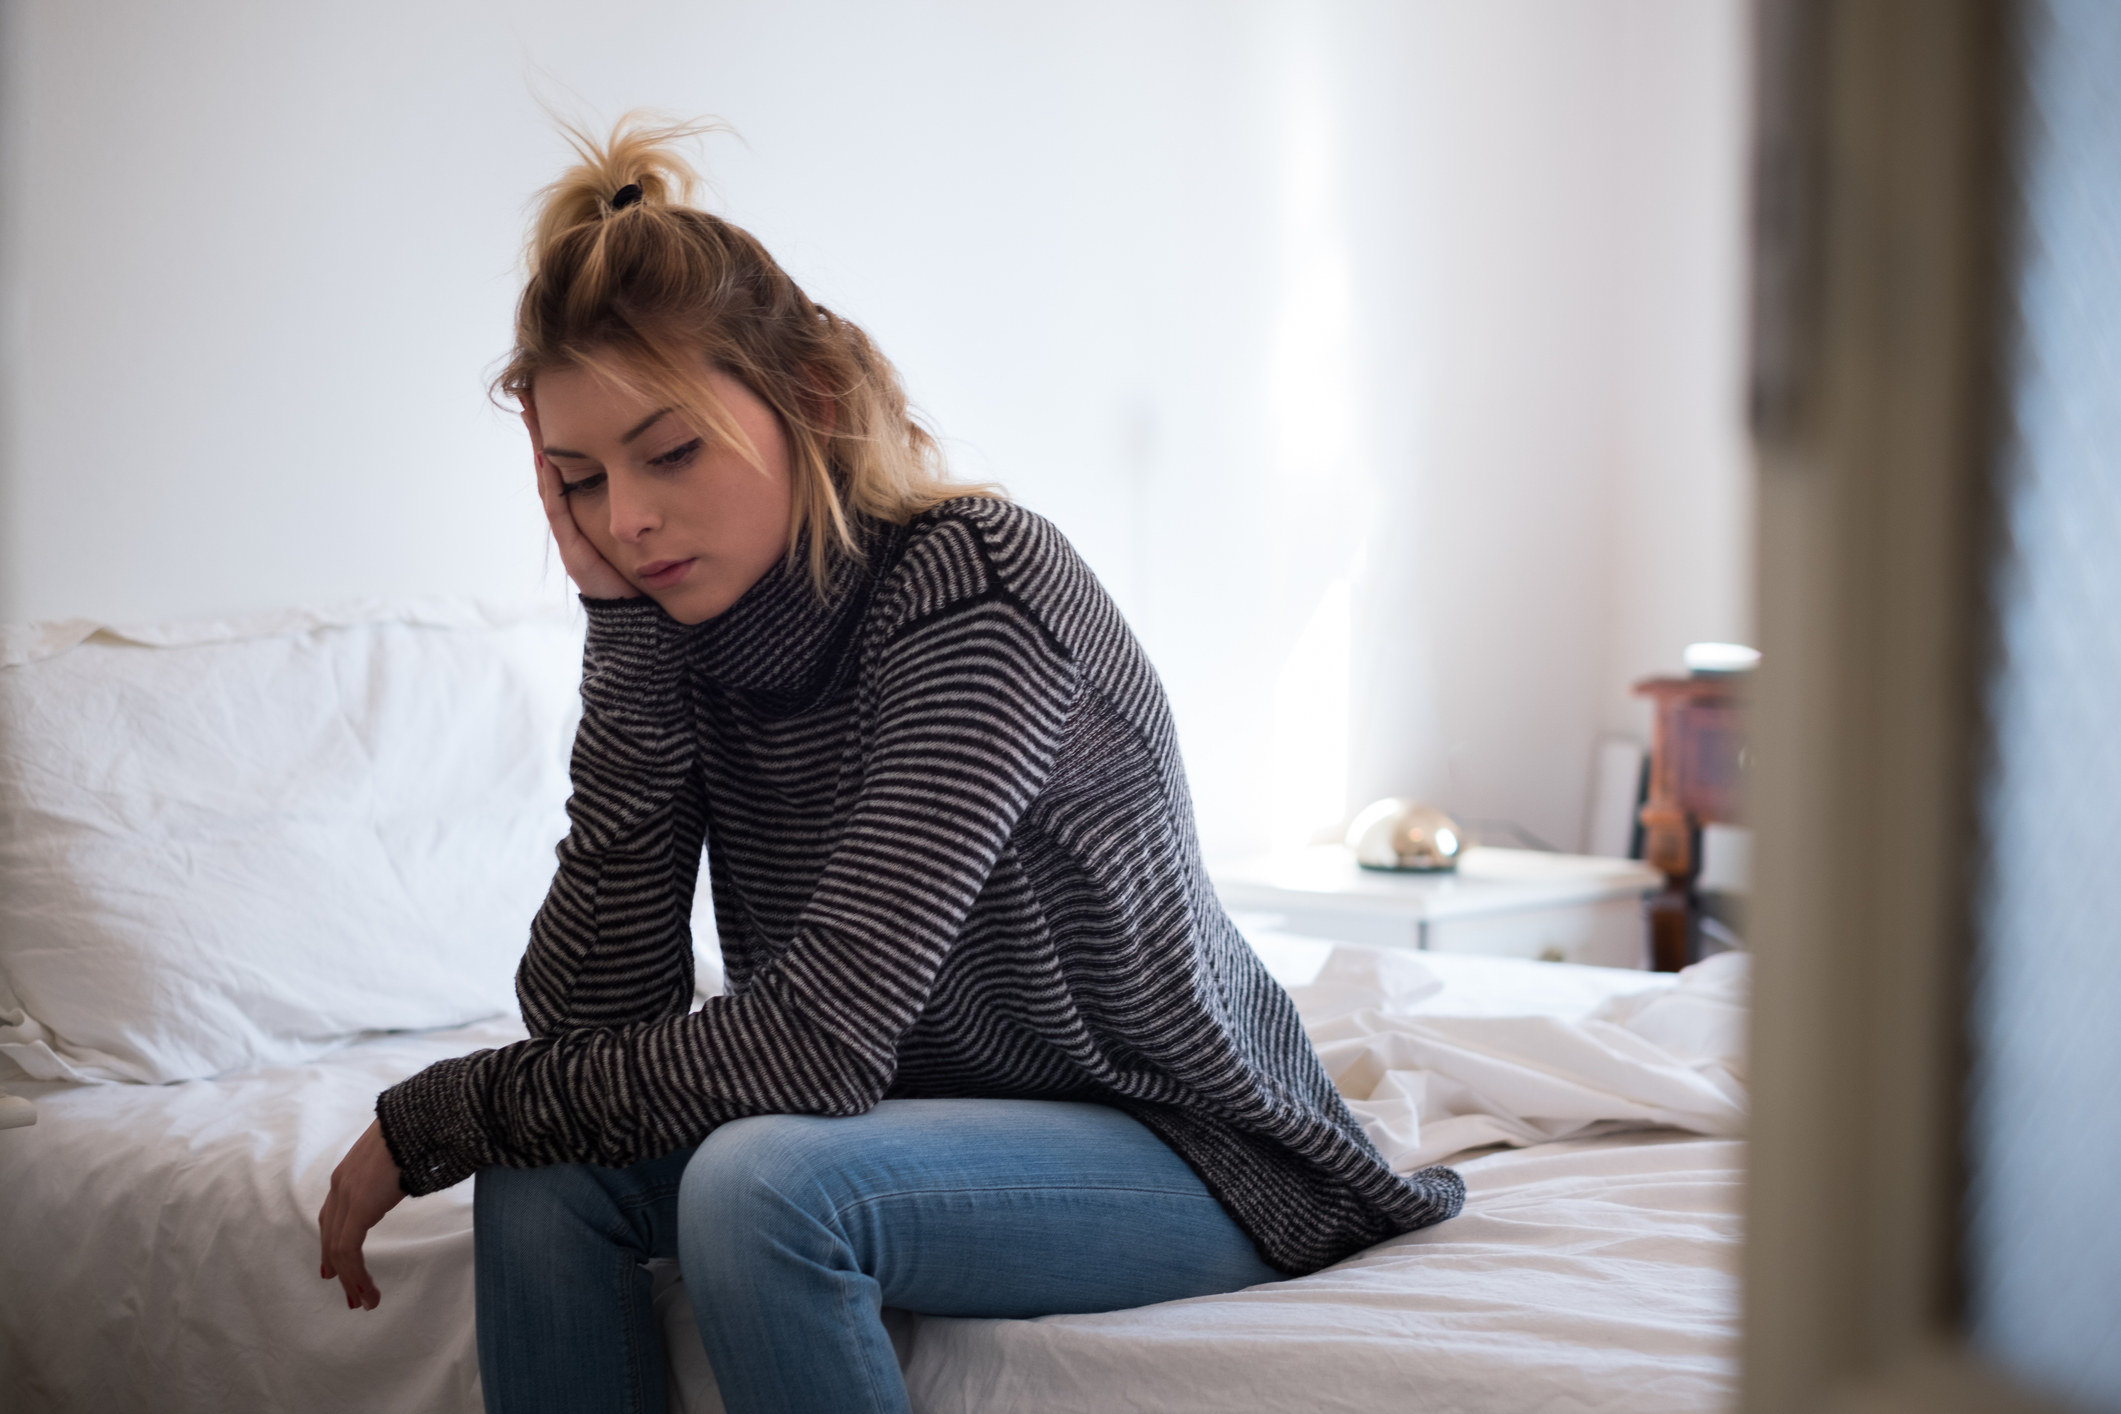 Sad young woman sitting on a bed